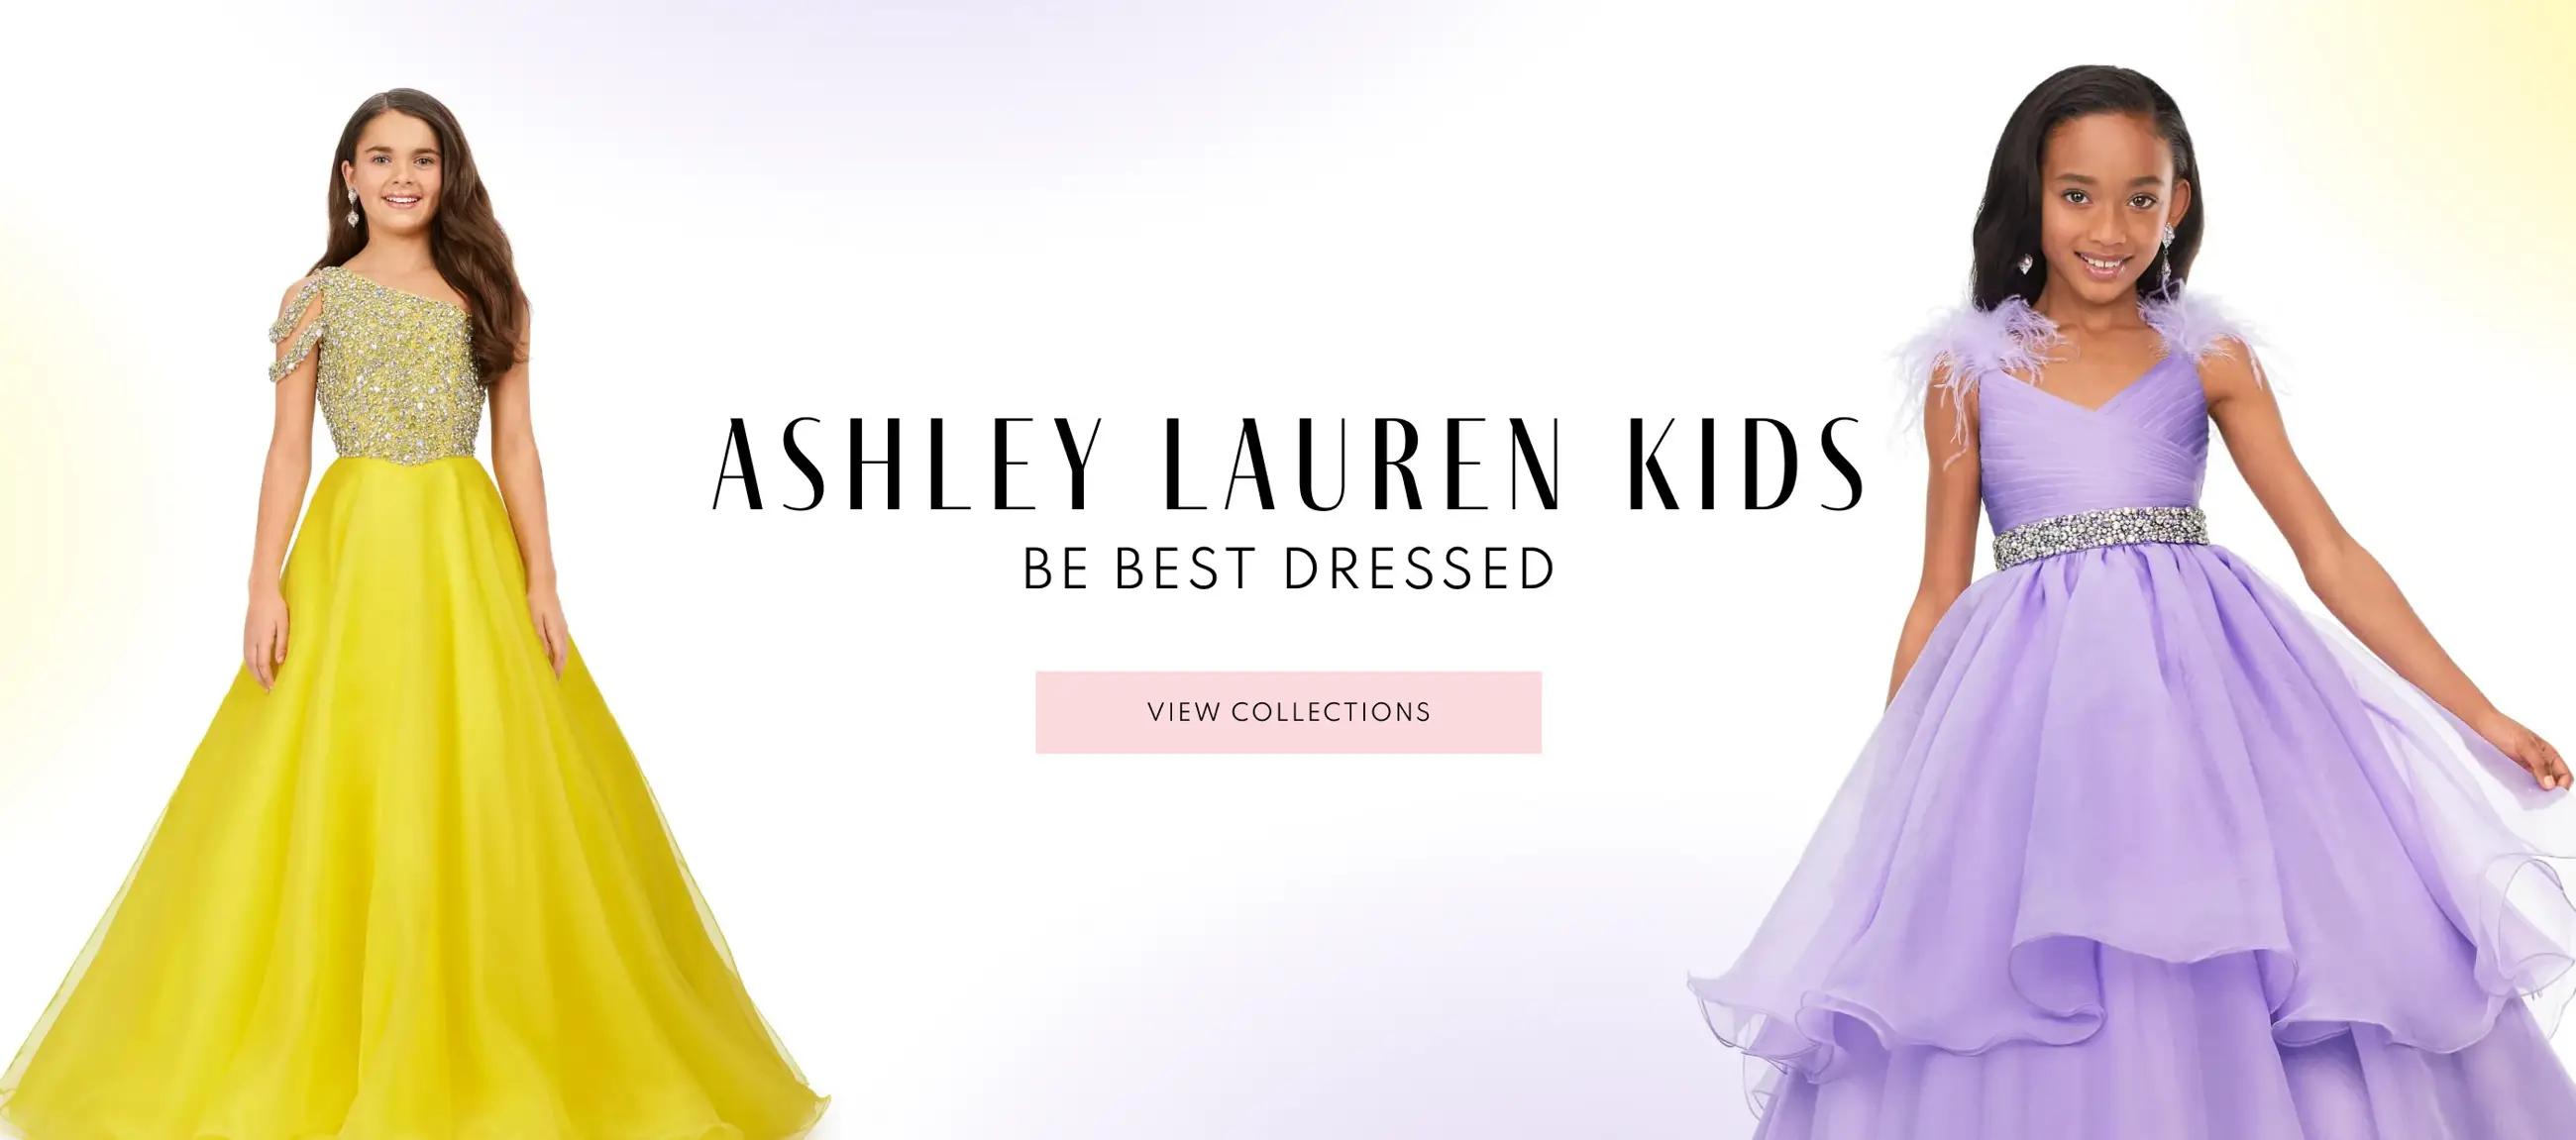 kids in purple and yellow dresses